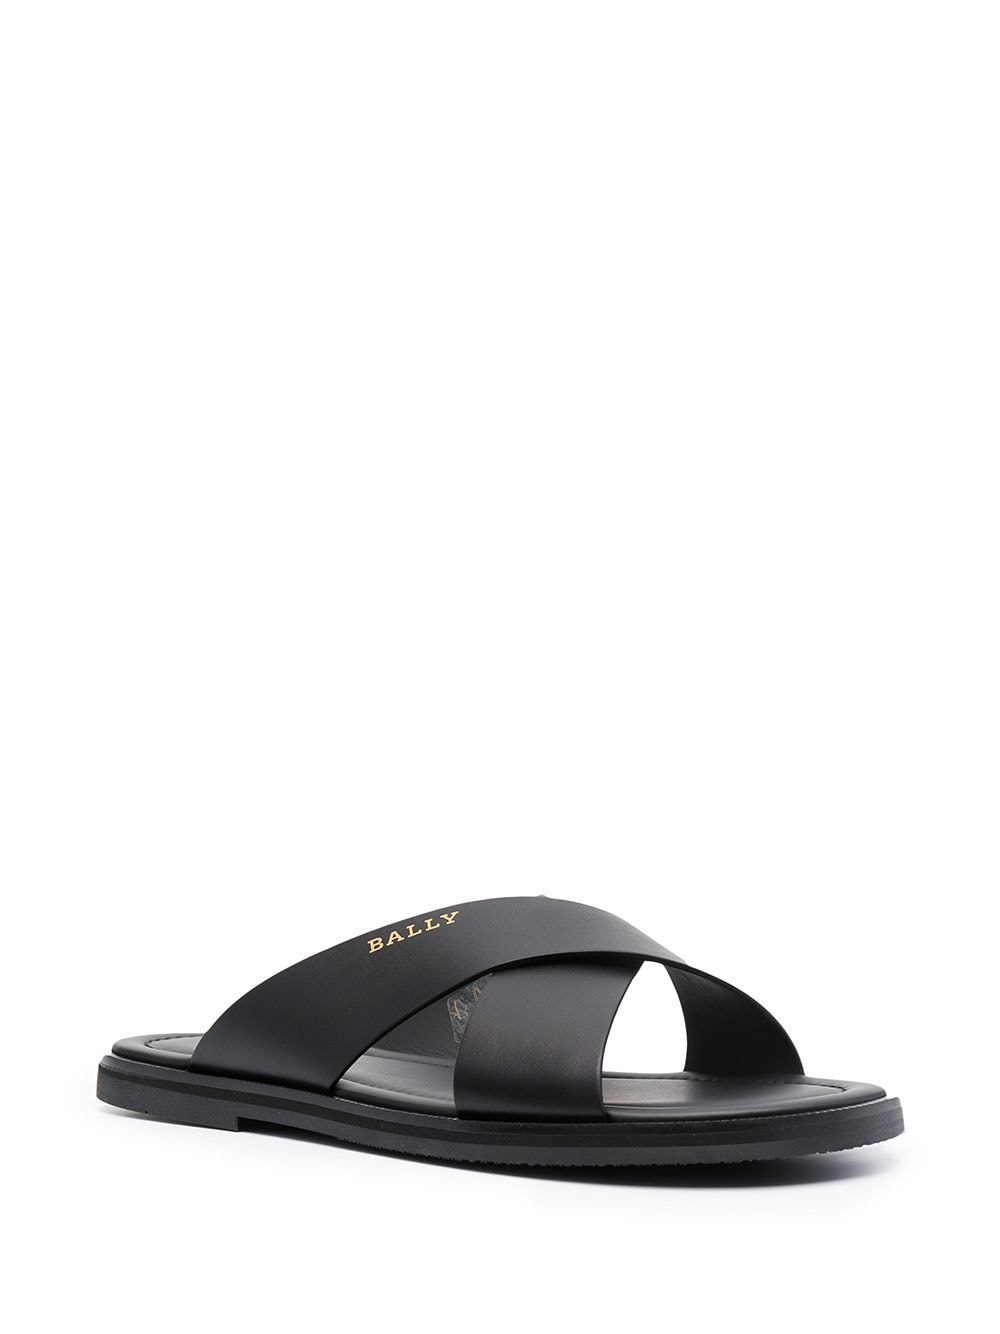 Bally criss-crossed Leather Slides - Farfetch